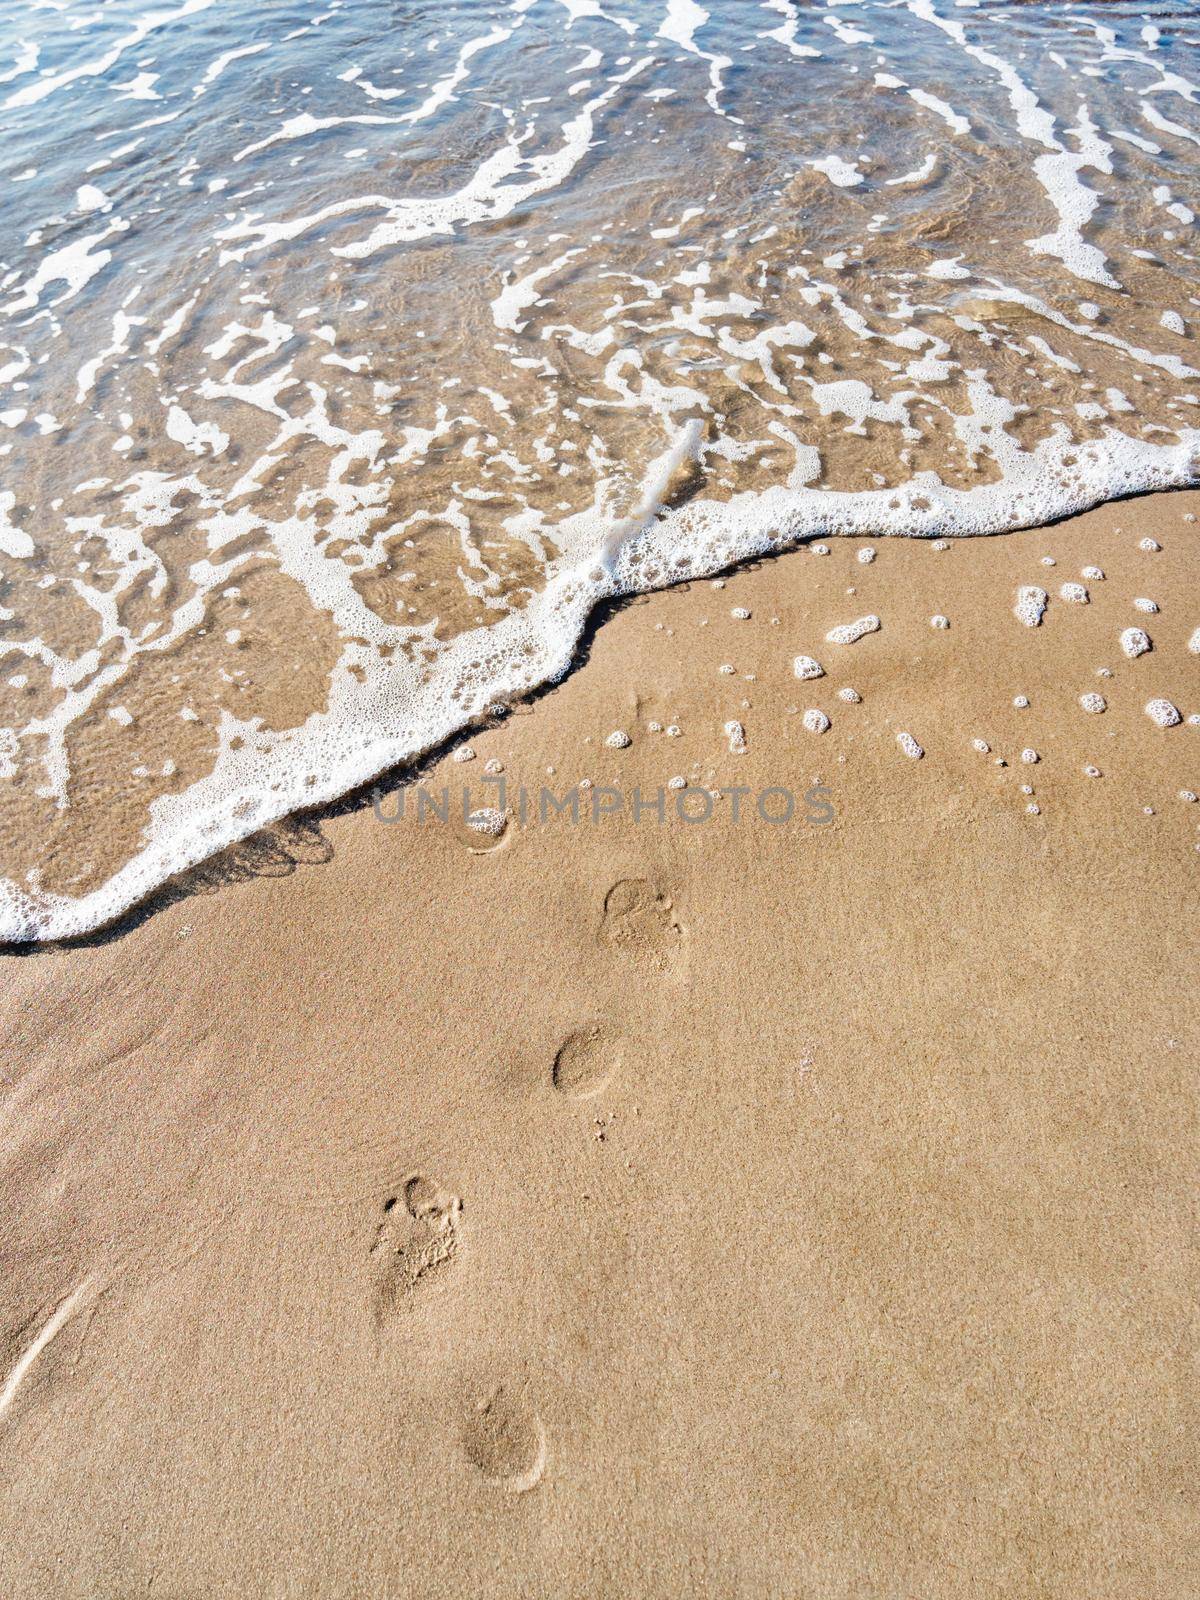 Footprints on wet sand. Sea surf and marks of bare feet. Walking on beach. Leisure activity. Vacation in country with warm climate. Travel.